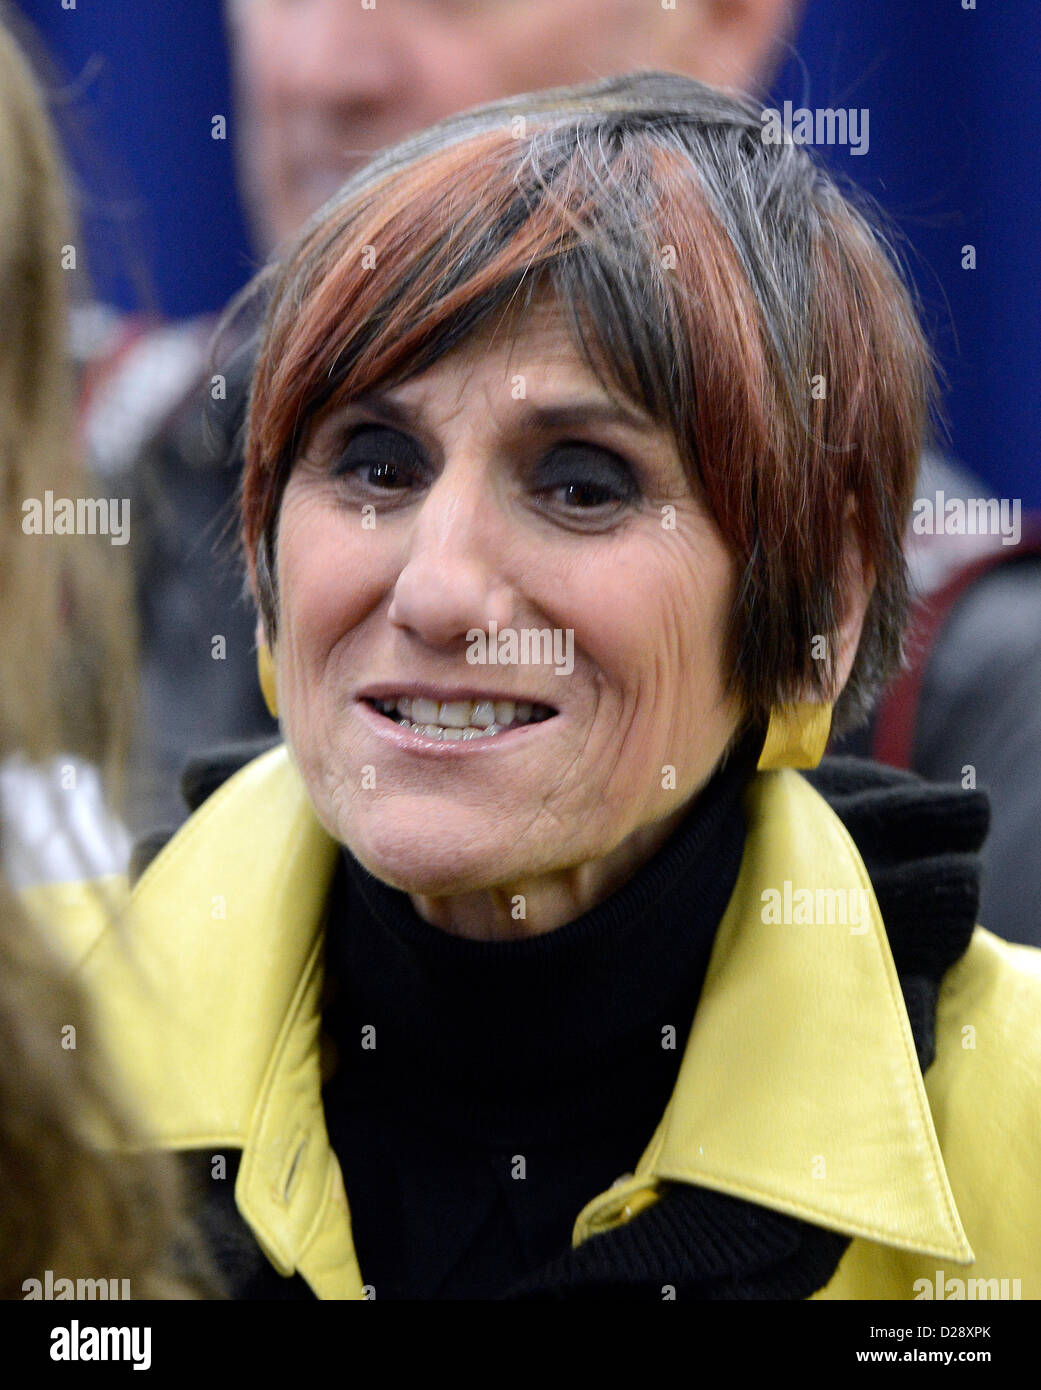 United States Representative Rosa DeLauro (Democrat of Connecticut) attends the remarks of U.S. President Barack Obama and Vice President Joe Biden at an event at the White House in Washington, D.C. to unveil a set of proposals to reduce gun violence on Wednesday, January 16, 2012. .Credit: Ron Sachs / CNP Stock Photo